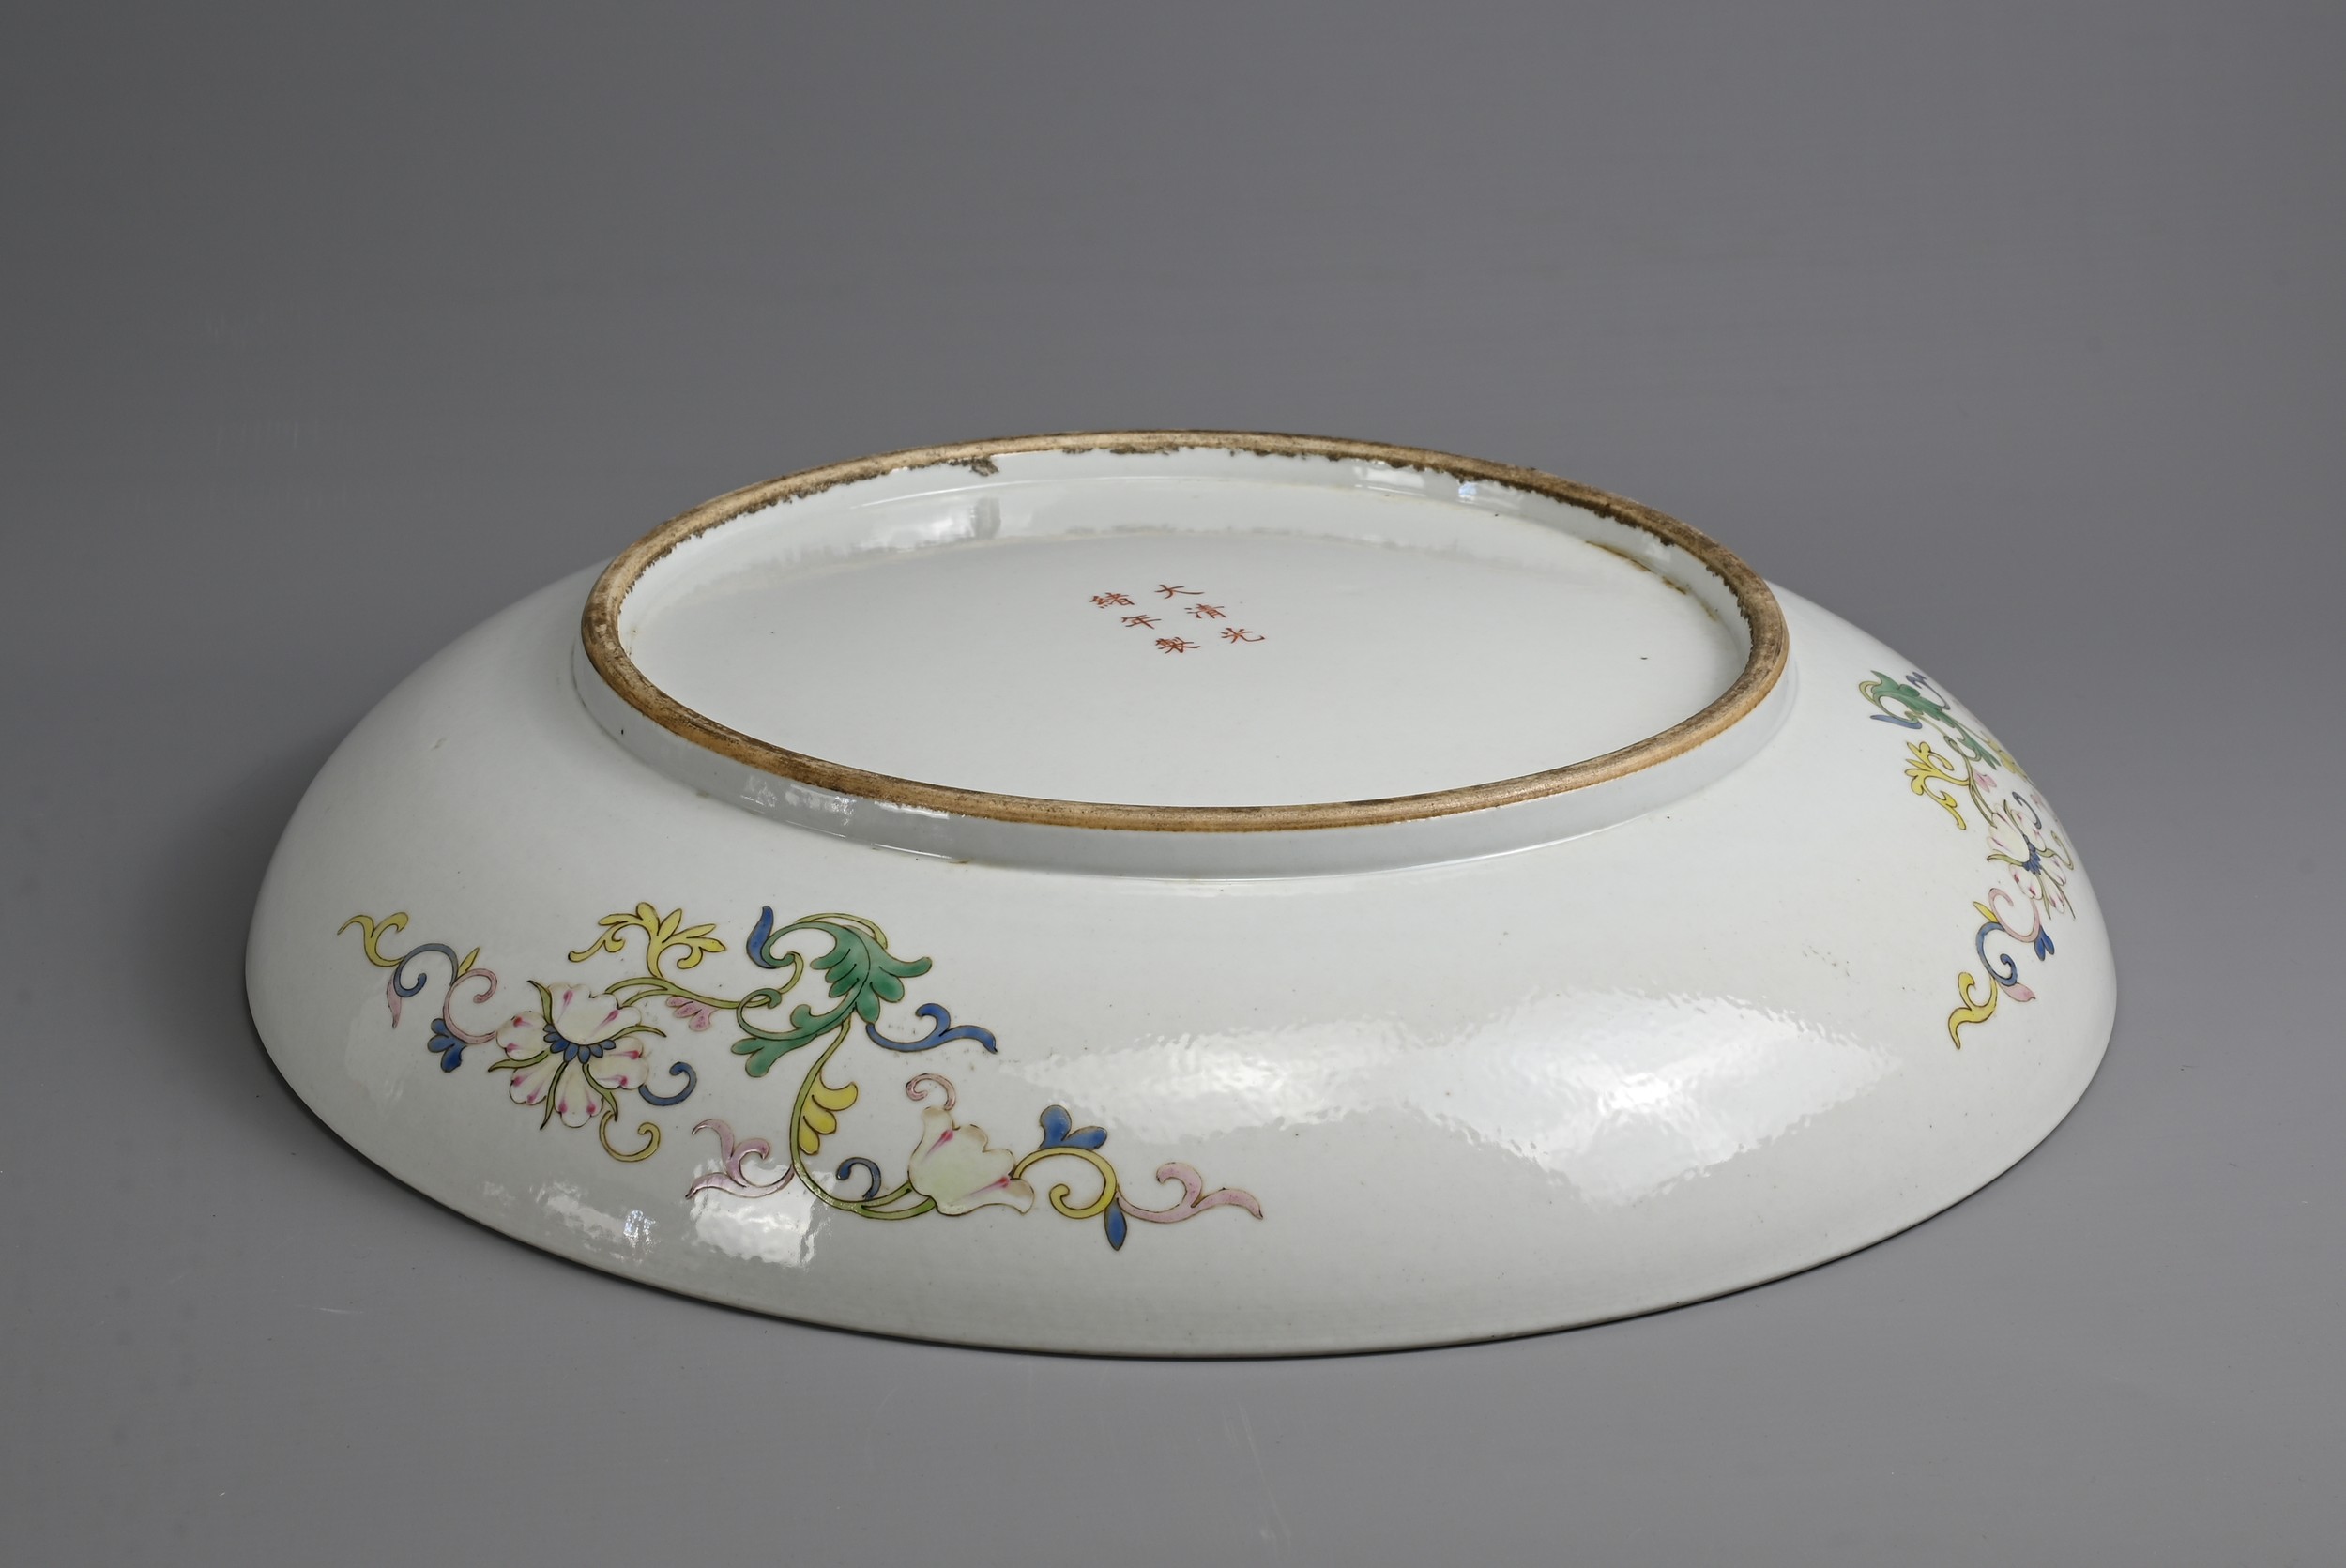 A LARGE CHINESE FAMILLE ROSE PORCELAIN DRAGON DISH, 19/20TH CENTURY. With deep rounded sides - Image 9 of 10